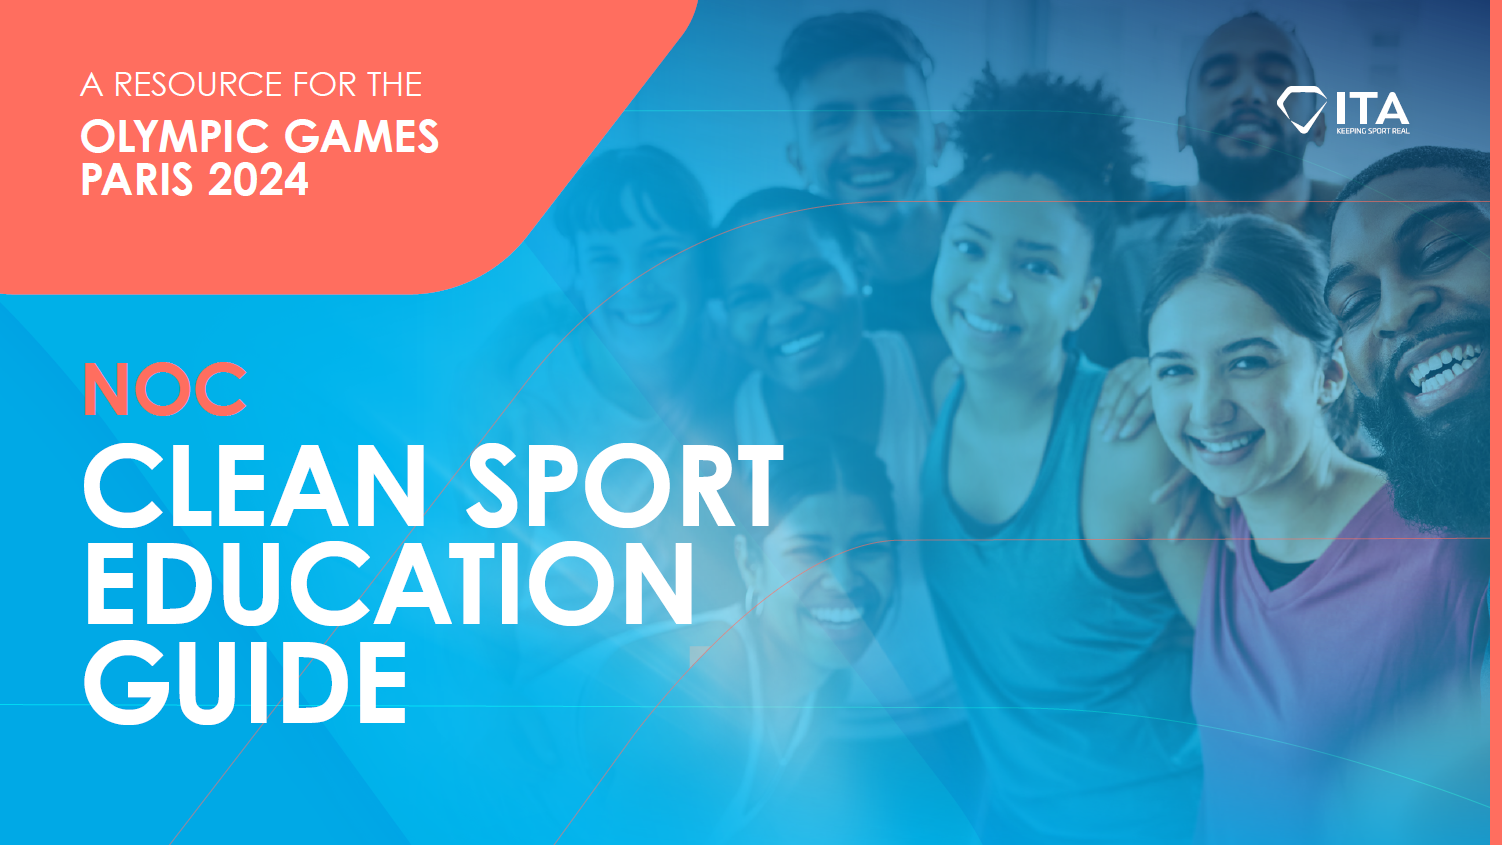 The ITA publishes National Olympic Committee (NOC) Clean Sport Education Guide for the Olympic Games Paris 2024